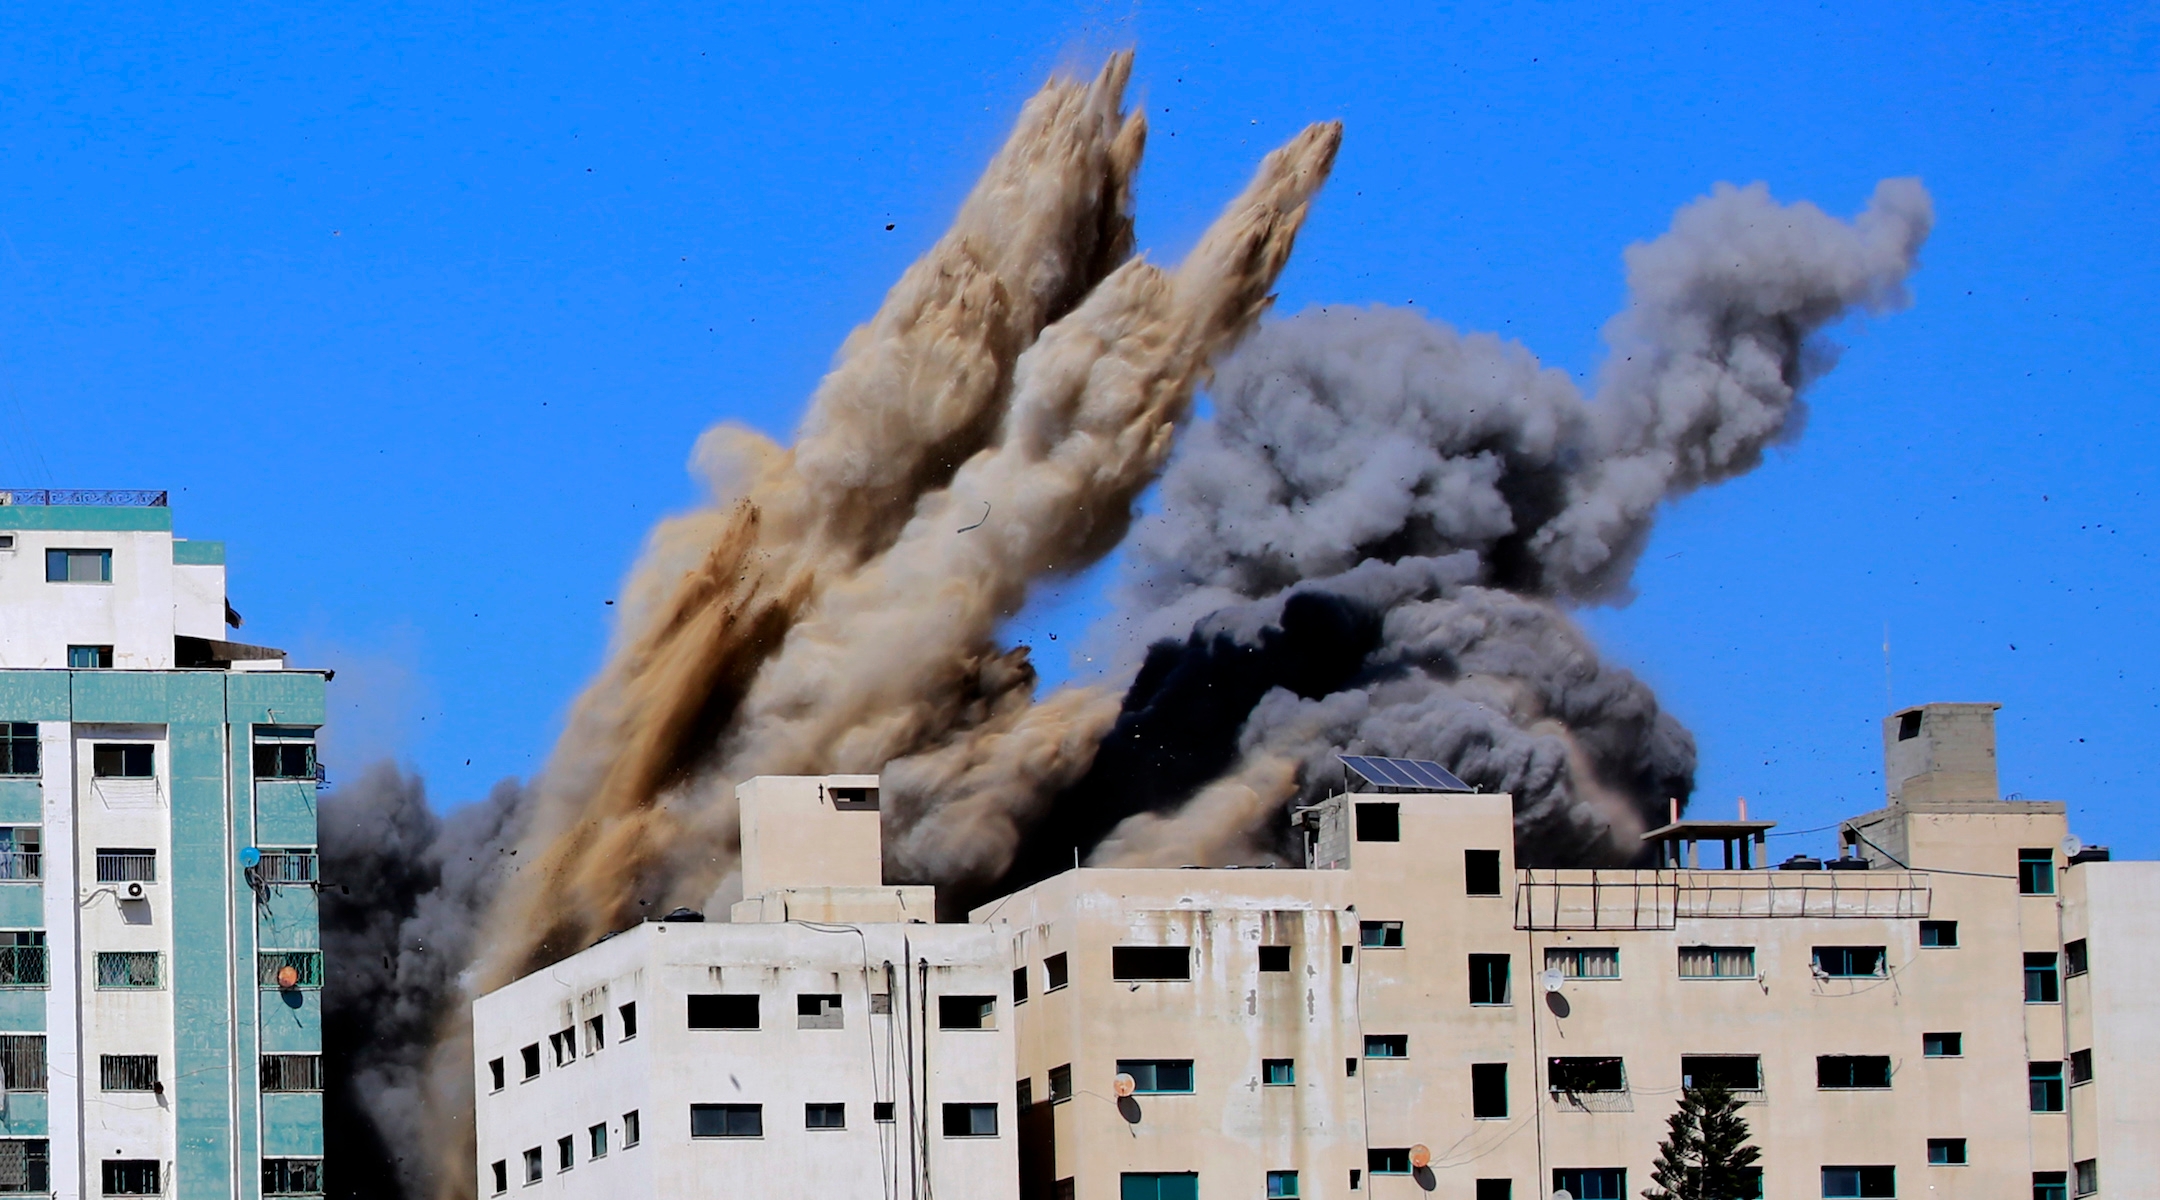 Smoke rises from the Al-Jalaa tower in Gaza City, which housed apartments and several media outlets, including The Associated Press and Al Jazeera, after an Israeli airstrike, May 15, 2021. (Atia Mohammed/Flash90)